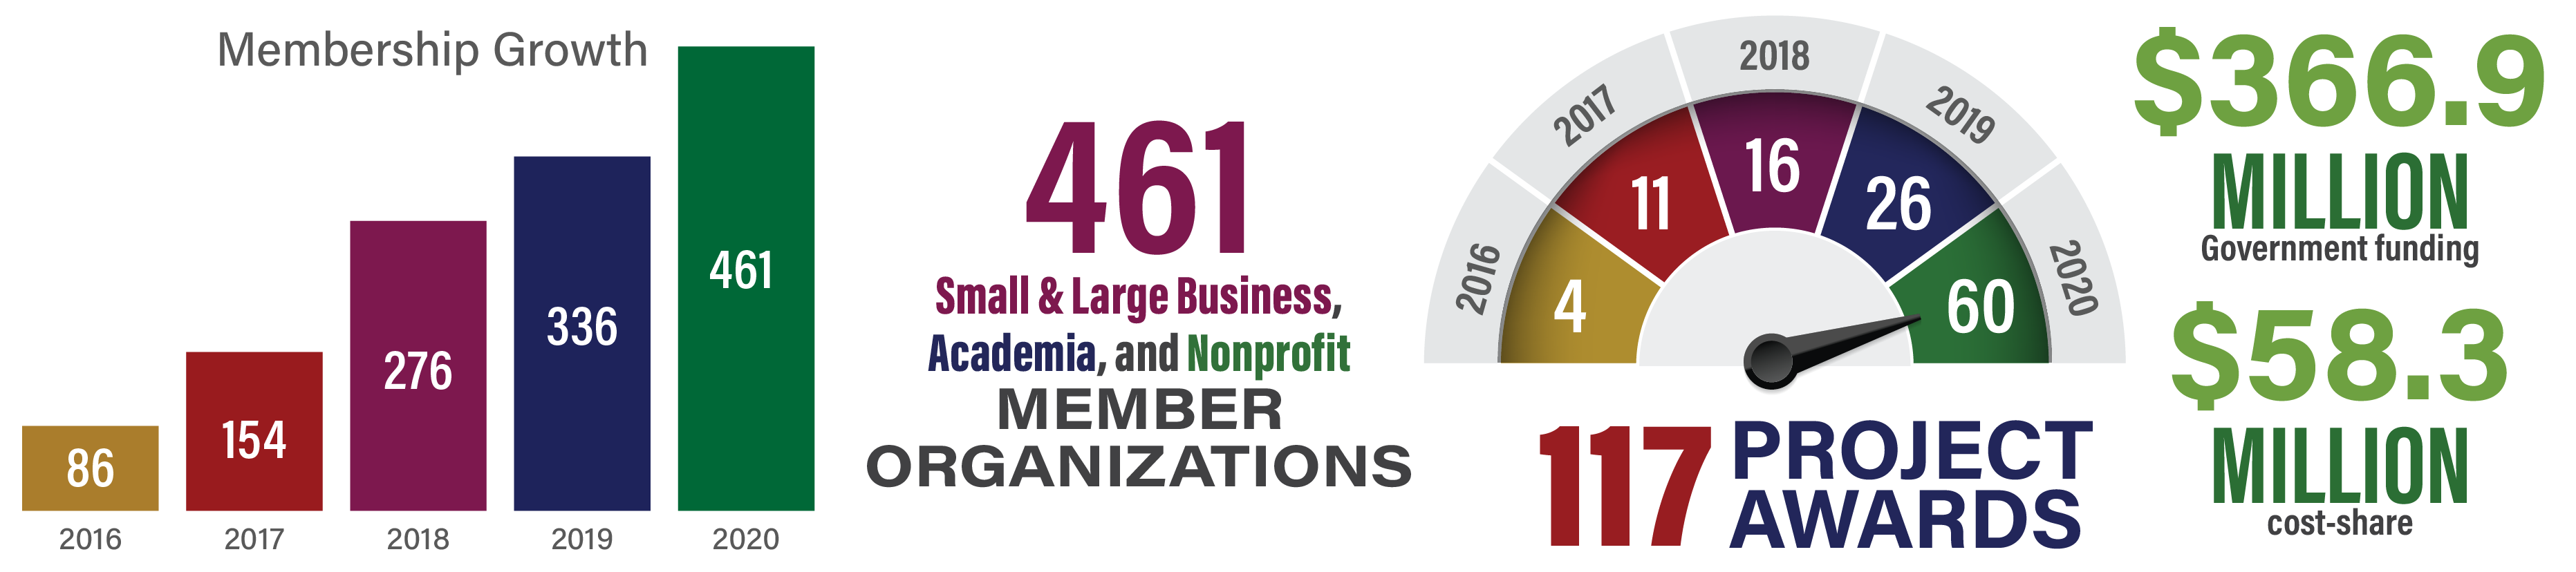 Membership Growth: 2016- 86, 2017- 154, 2018- 276, 2019- 336, 2020- 461; 461 Small & Large business, academia and nonprofit member organizations. ~120 Project Awards; $366.9 Million in government funding. $58.3 Million in cost share.